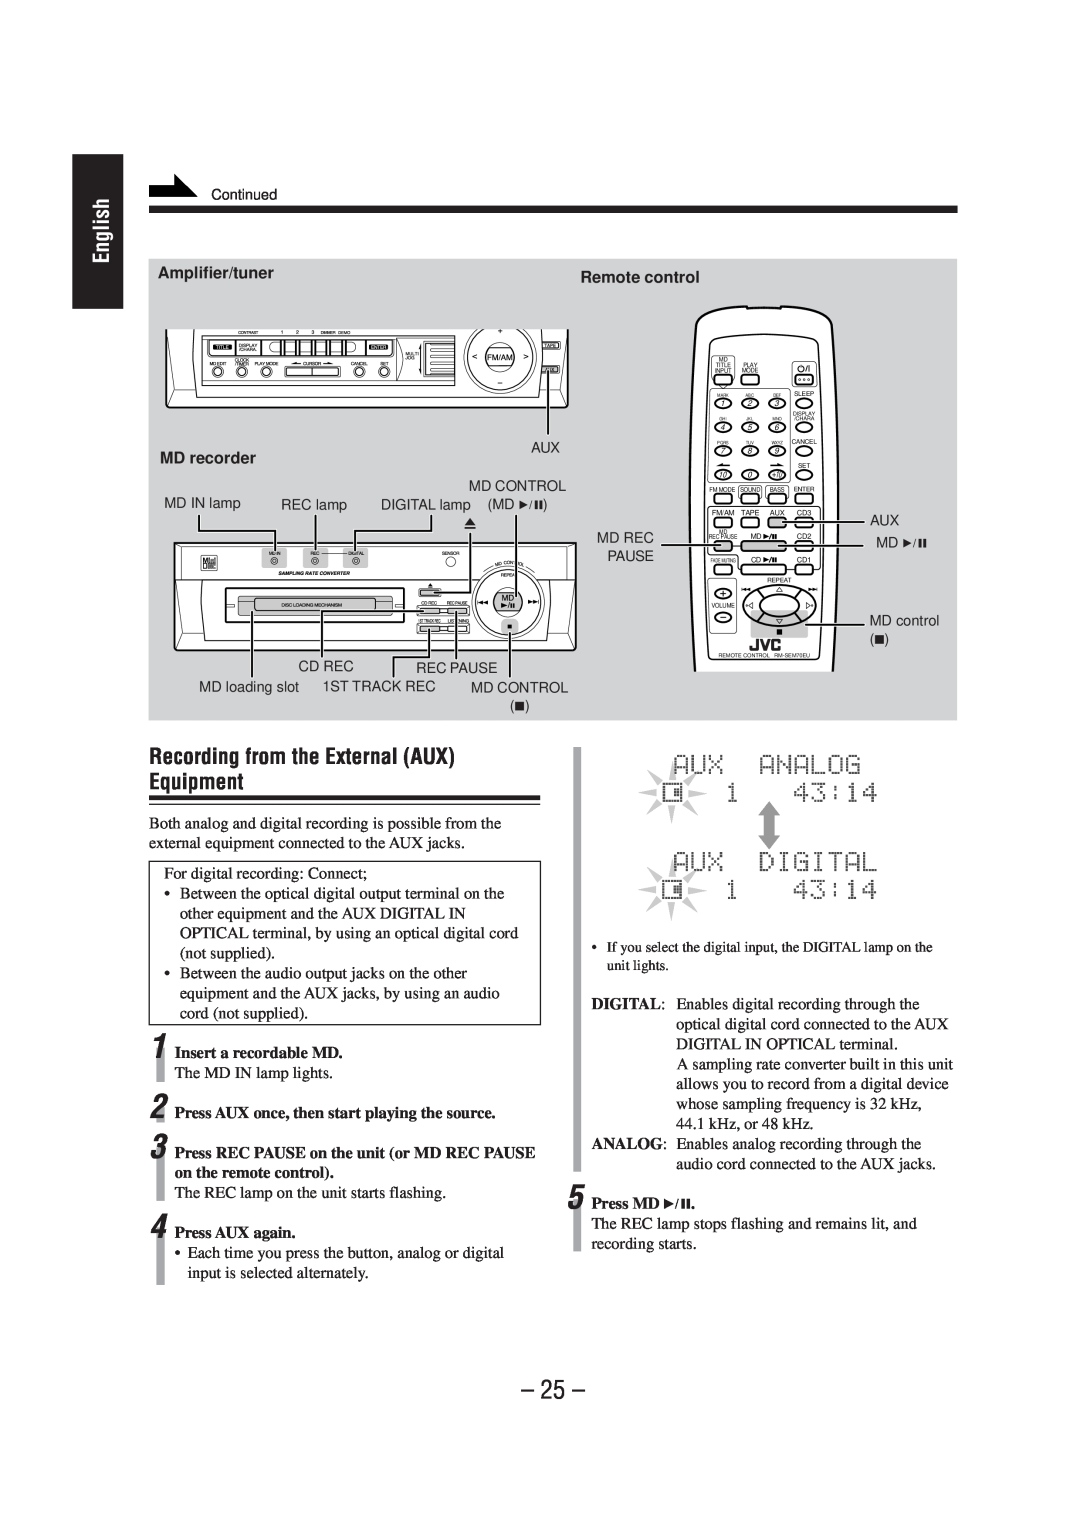 JVC CA-MD70 manual Recording from the External AUX Equipment, English, Amplifier/tuner, Remote control, MD recorder 